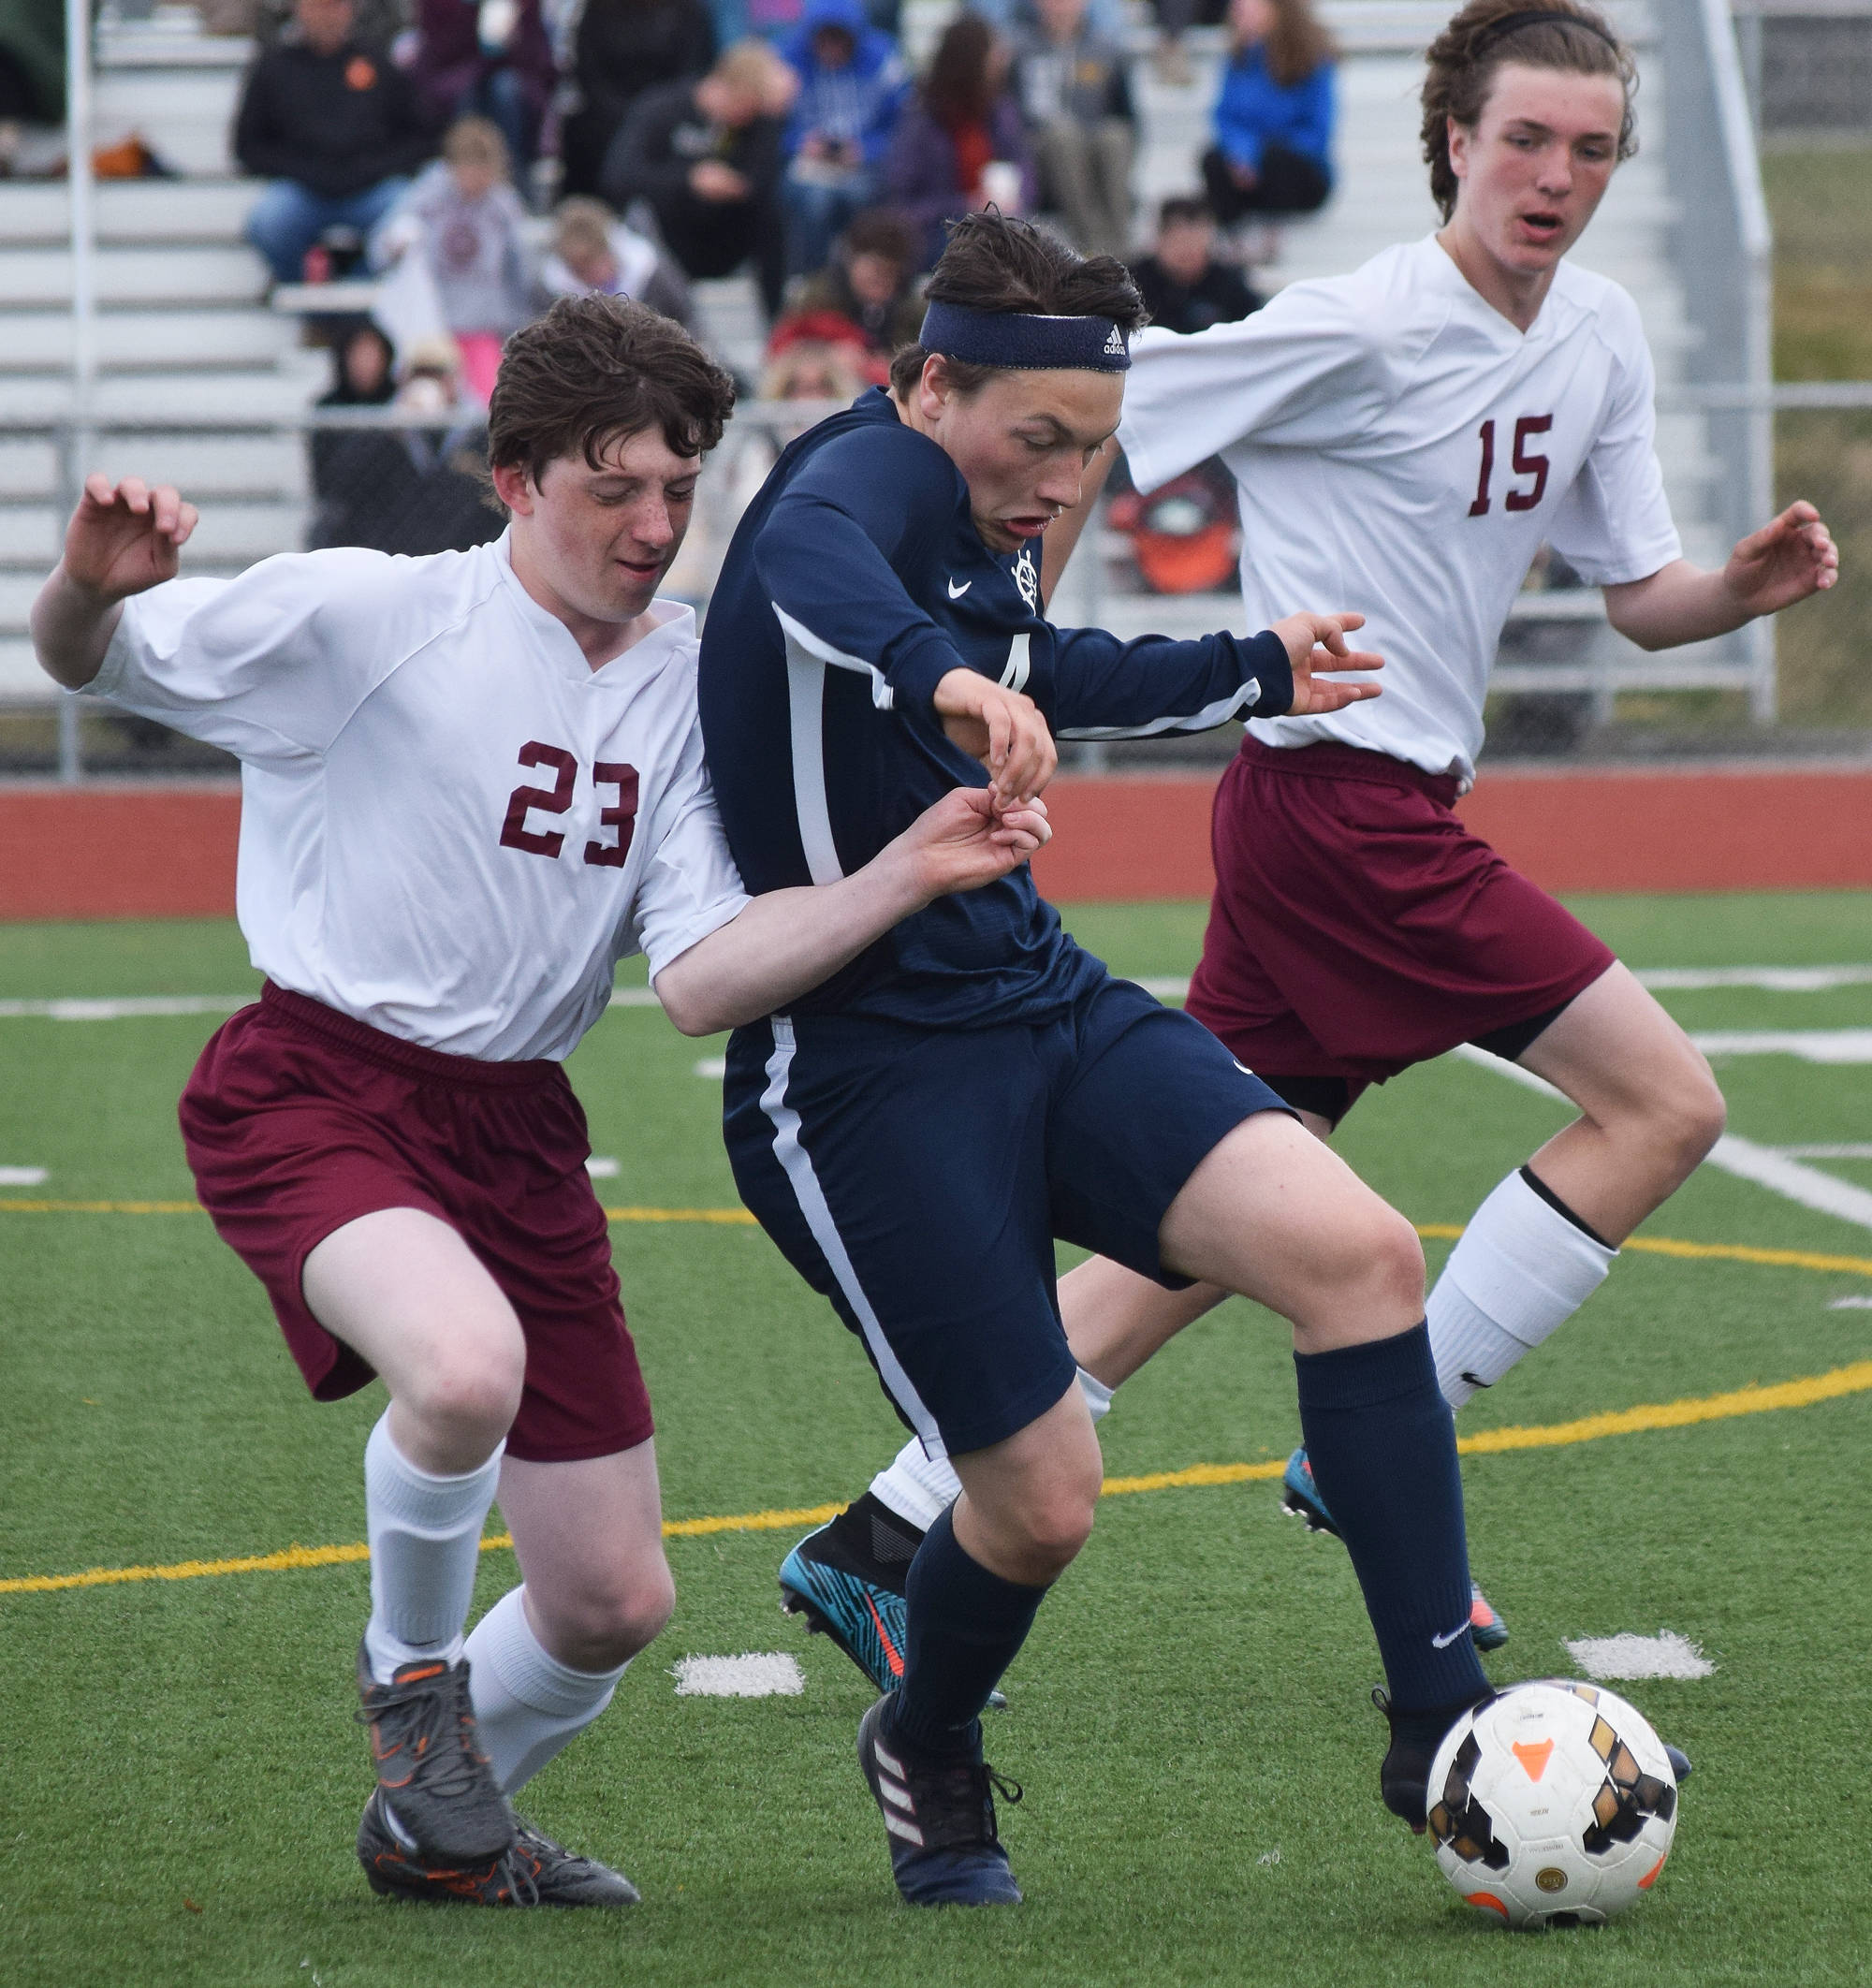 Homer midfielder Timothy Blakely (center) battles for the ball against Grace’s Dylan Harris (23) and Luke Schaezlien Thursday in Division II soccer tournament play at Eagle River High School. (Photo by Joey Klecka/Peninsula Clarion)